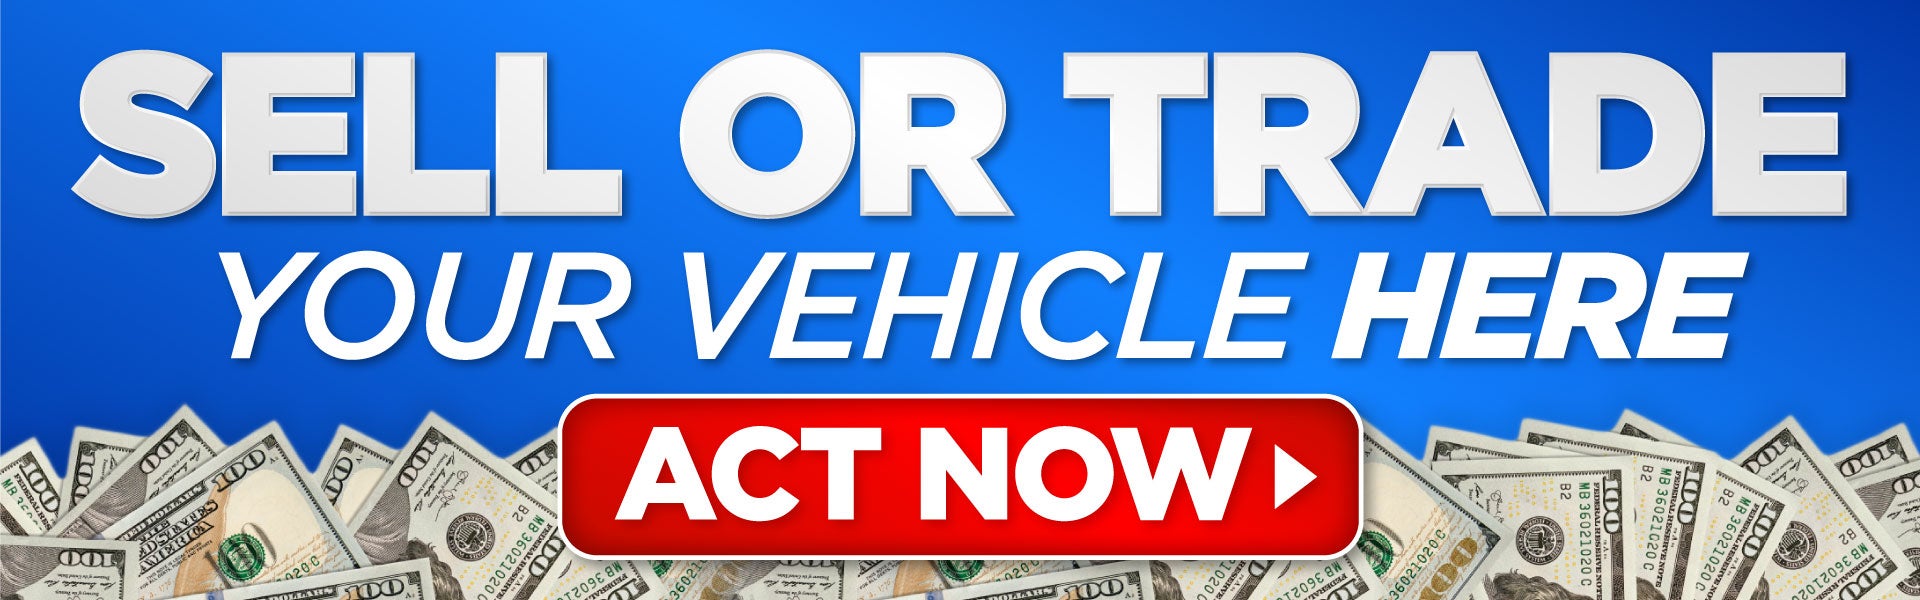 Sell or Trade Your Vehicle Here - ACT NOW